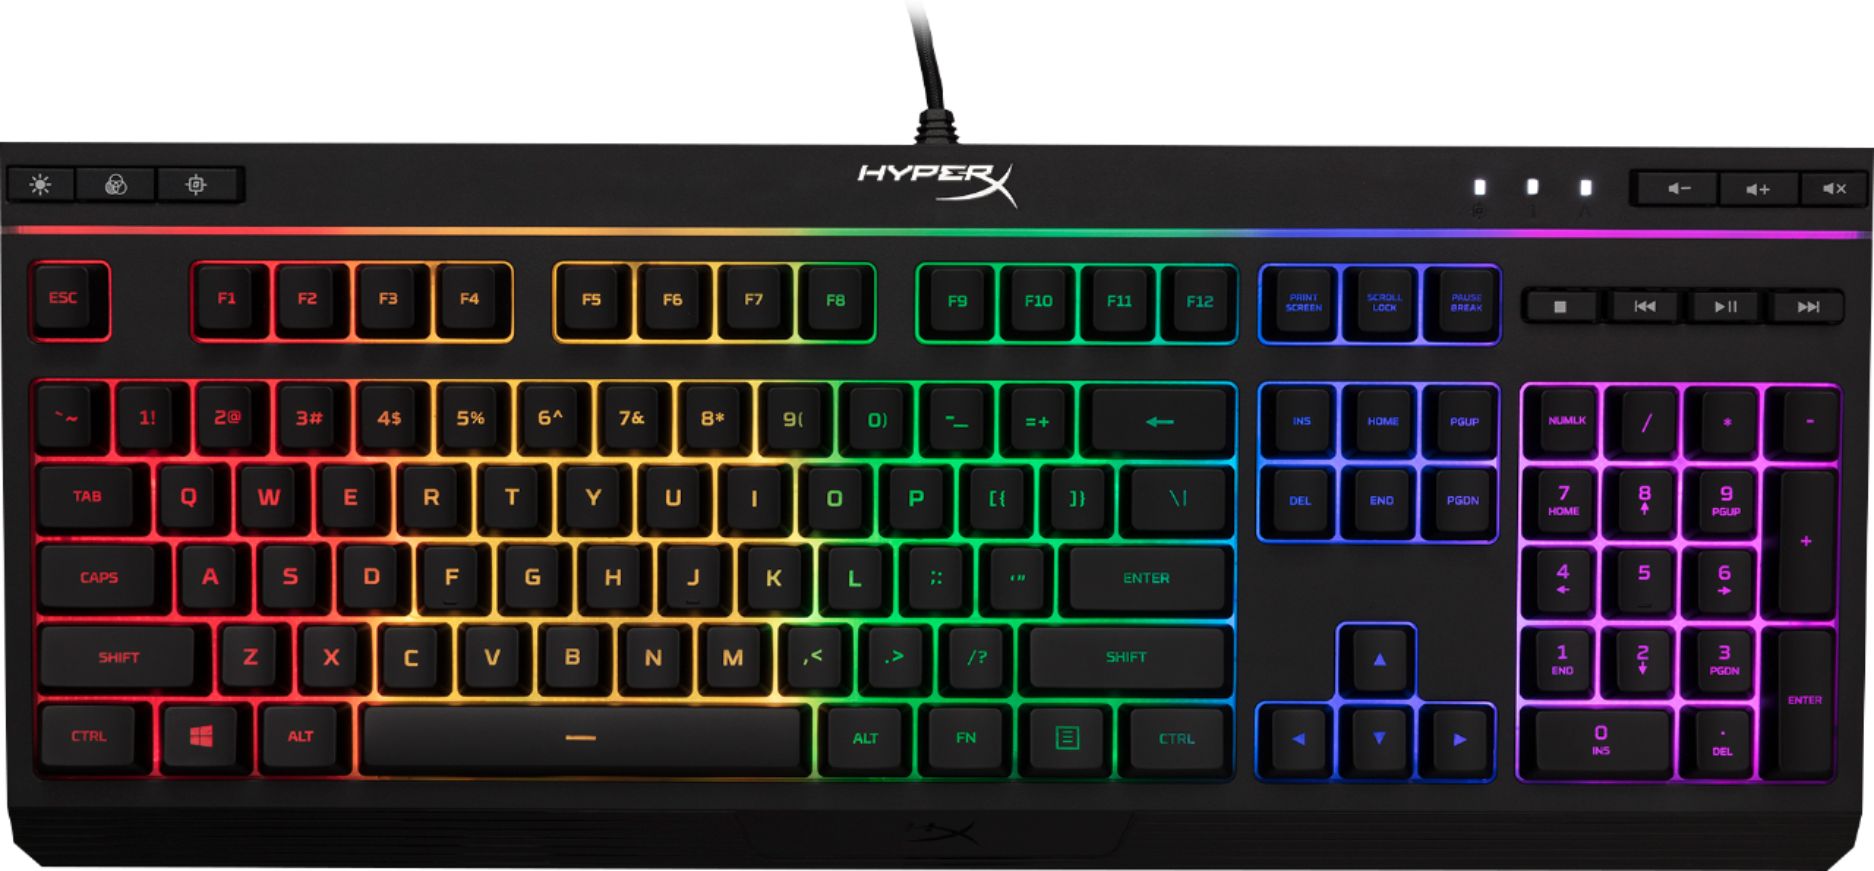 alkove hval Hound HyperX Alloy Core Full-size Wired Gaming Membrane Keyboard with RGB Lighting  Black 4P4F5AA#ABA/HX-KB5ME2-US - Best Buy